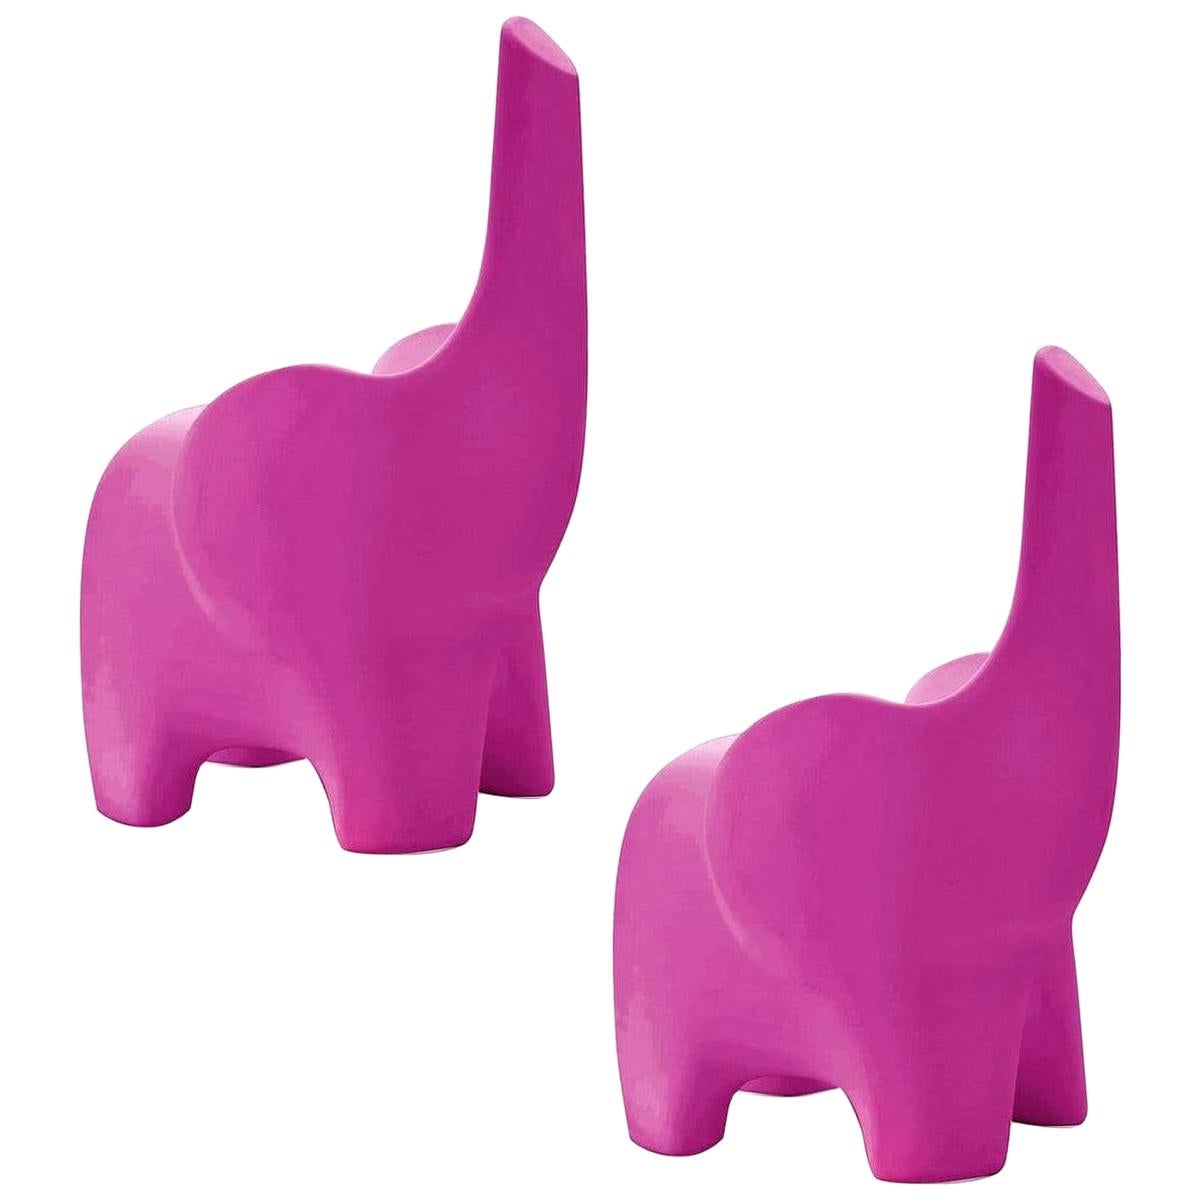 In Stock in Los Angeles, Set of 2 Tino, Lilac / Purple Elephant Children Chair